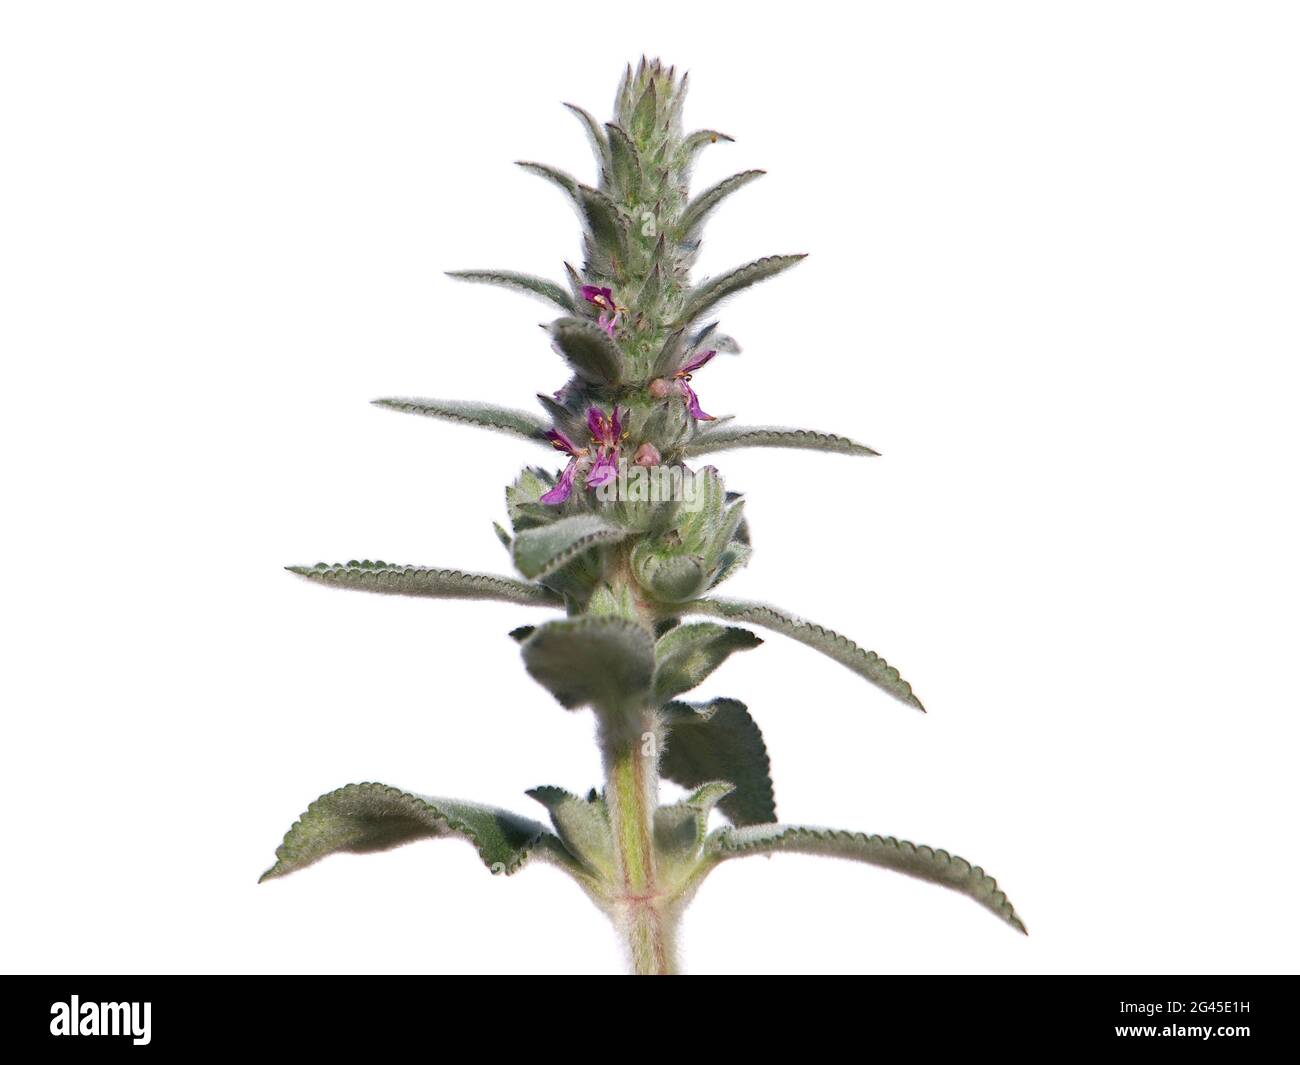 Downy woundwort blooming plant isolated on white, Stachys germanica Stock Photo